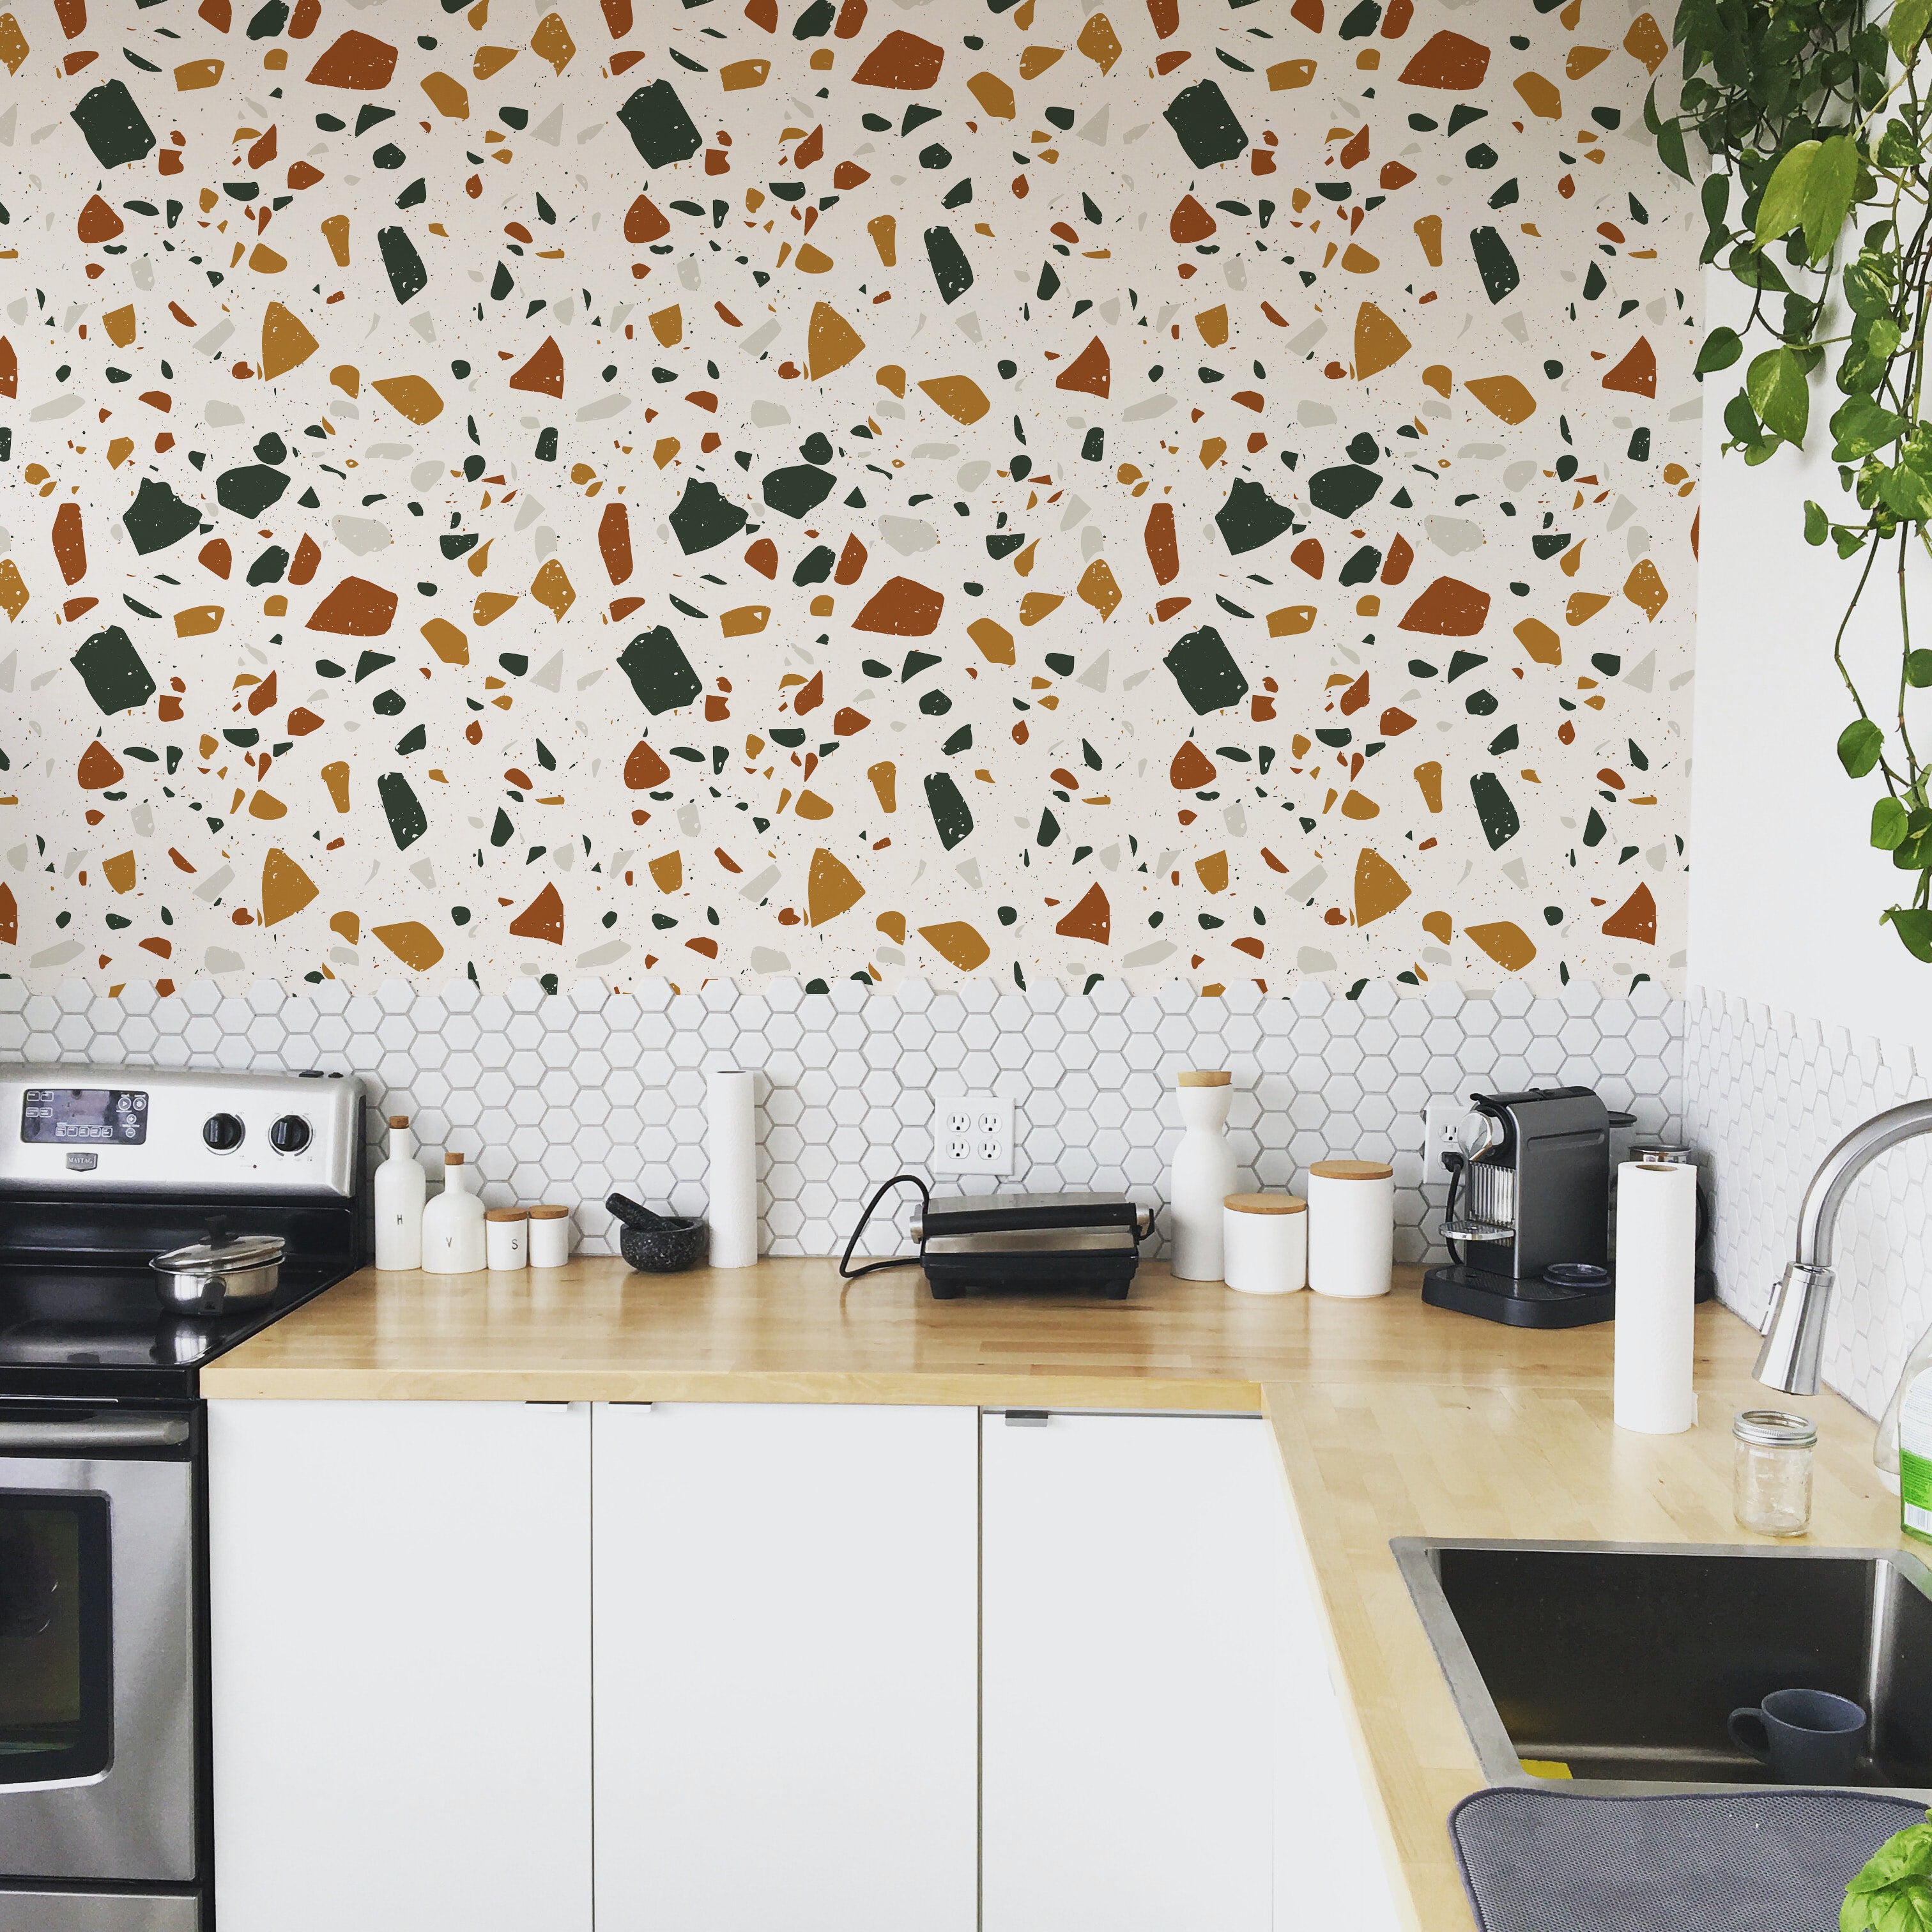 A stylish kitchen featuring a backsplash adorned with Earthy Terrazzo wallpaper, showcasing a colorful terrazzo pattern with orange, green, and gray chips on a white background, complementing white kitchen cabinets and hexagonal tiles.